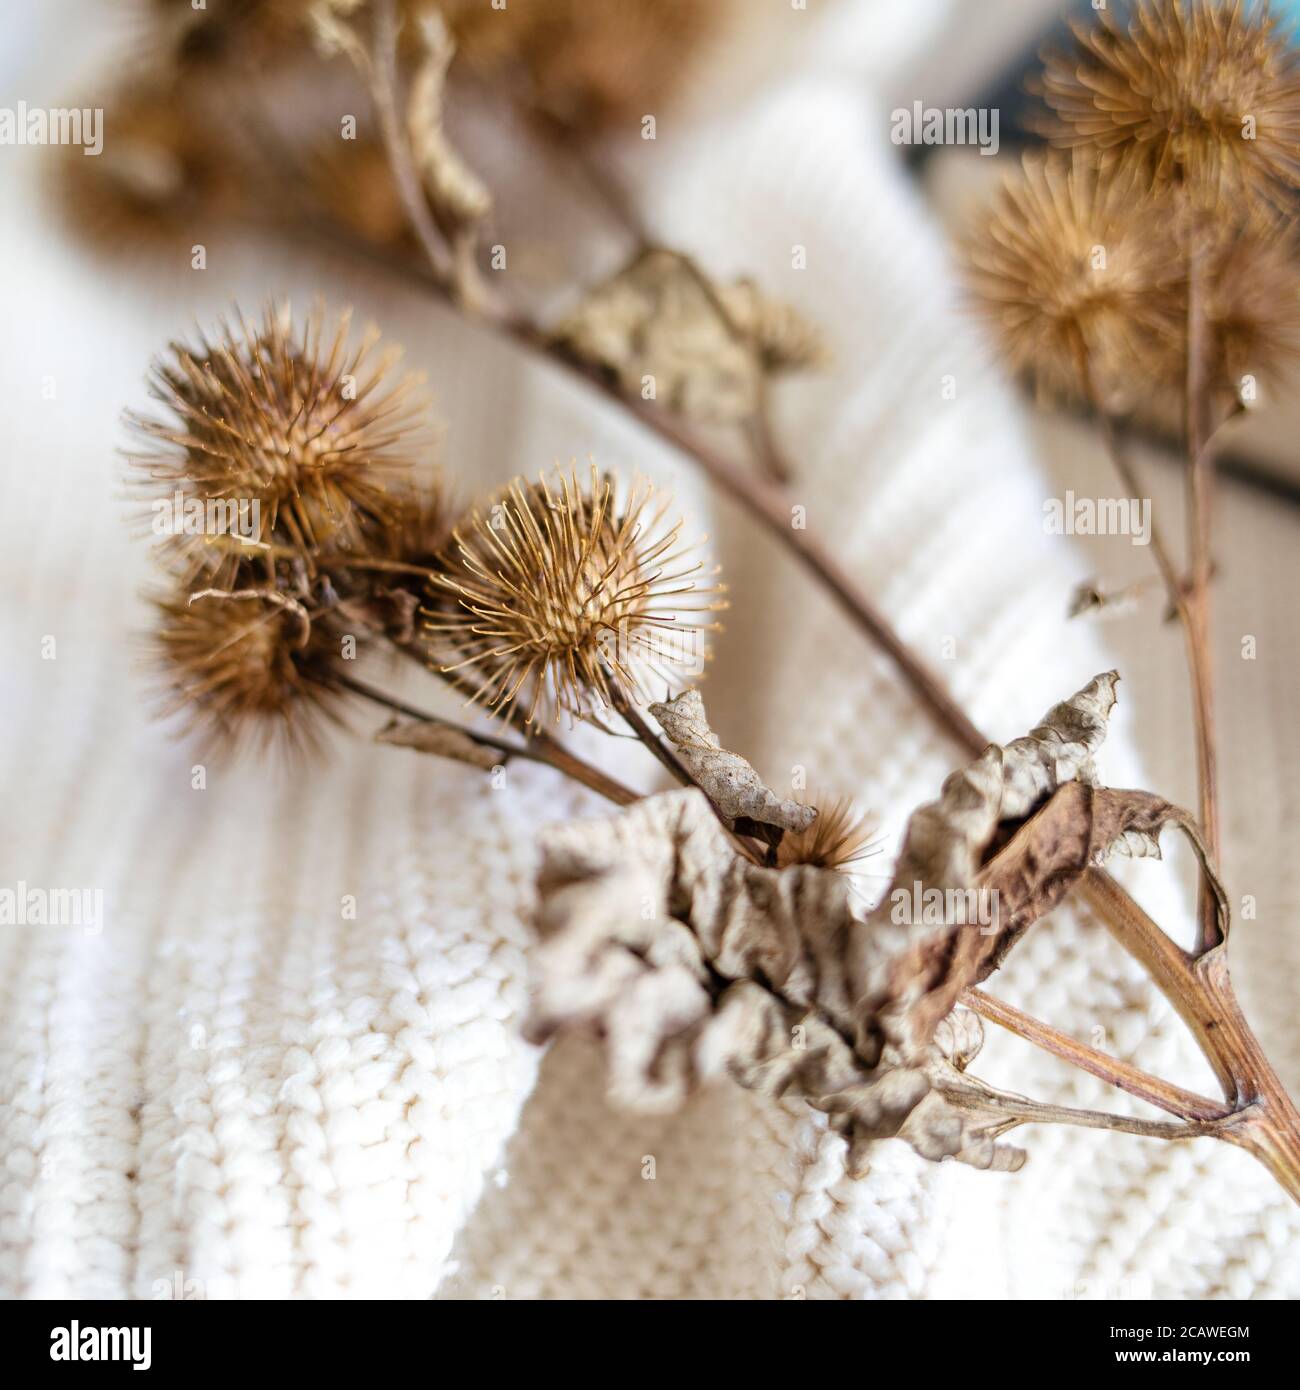 Soft focus of dried thistles on a white knitted fabric Stock Photo